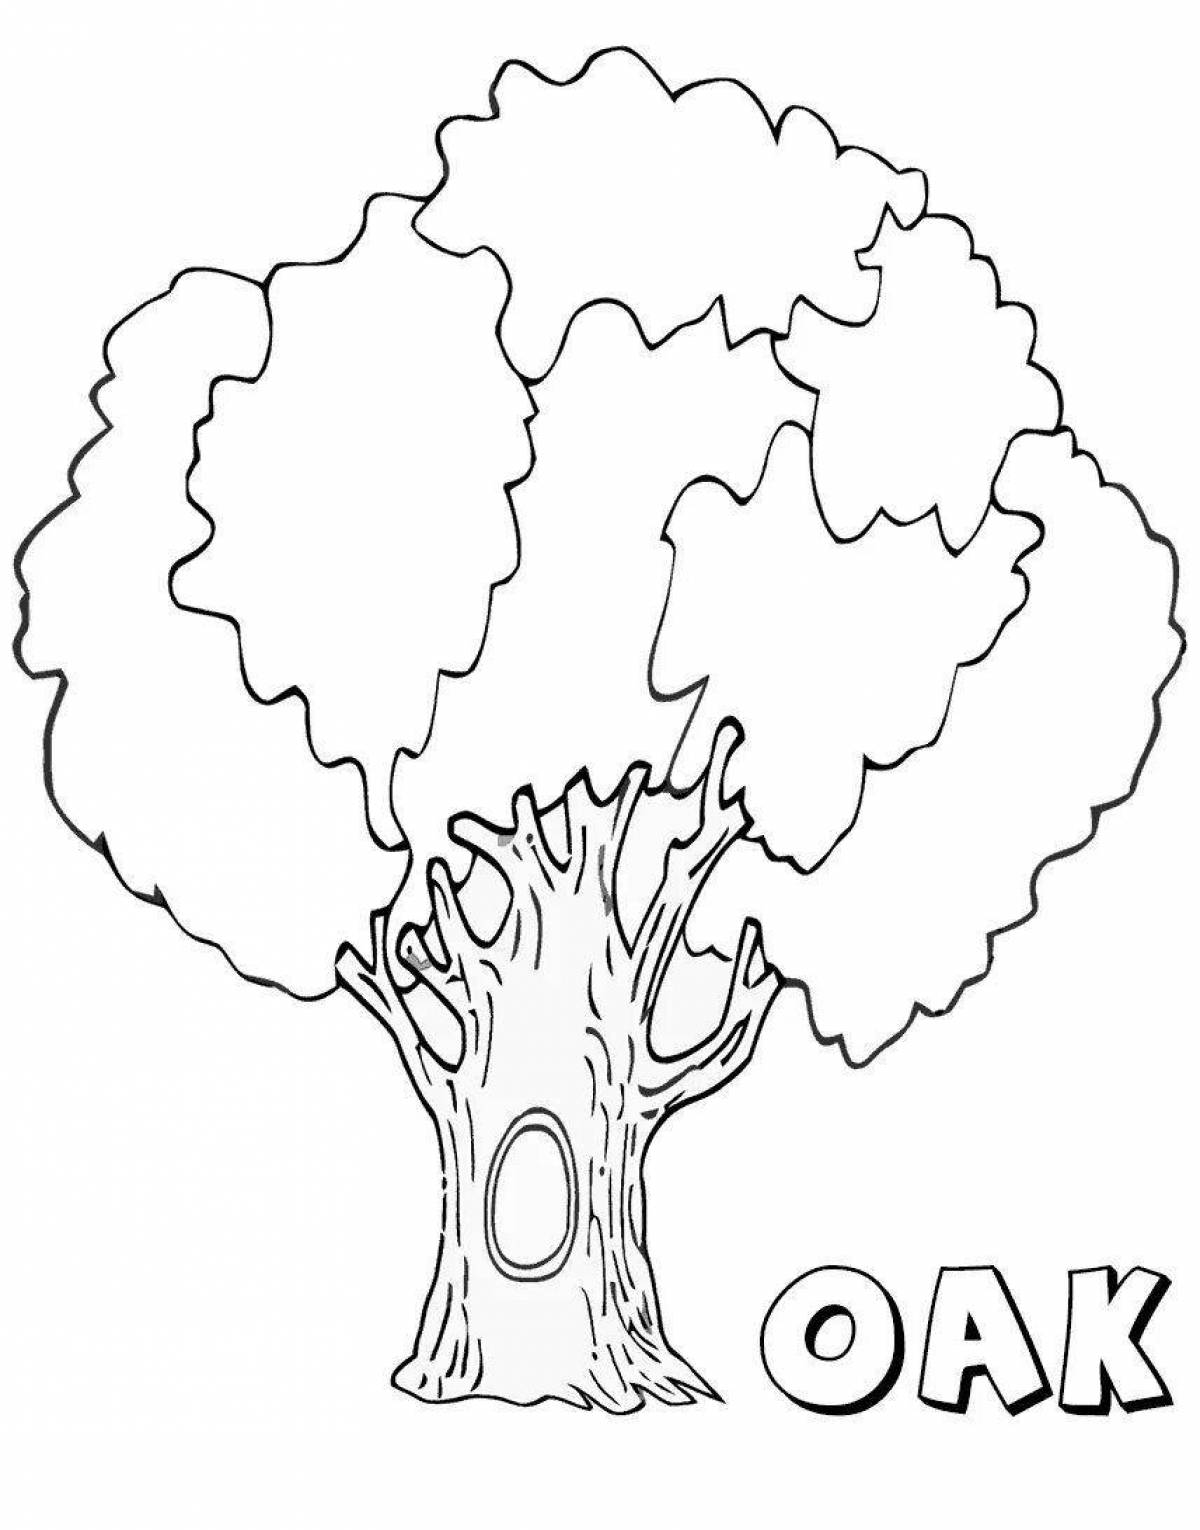 Adorable oak tree coloring page for babies